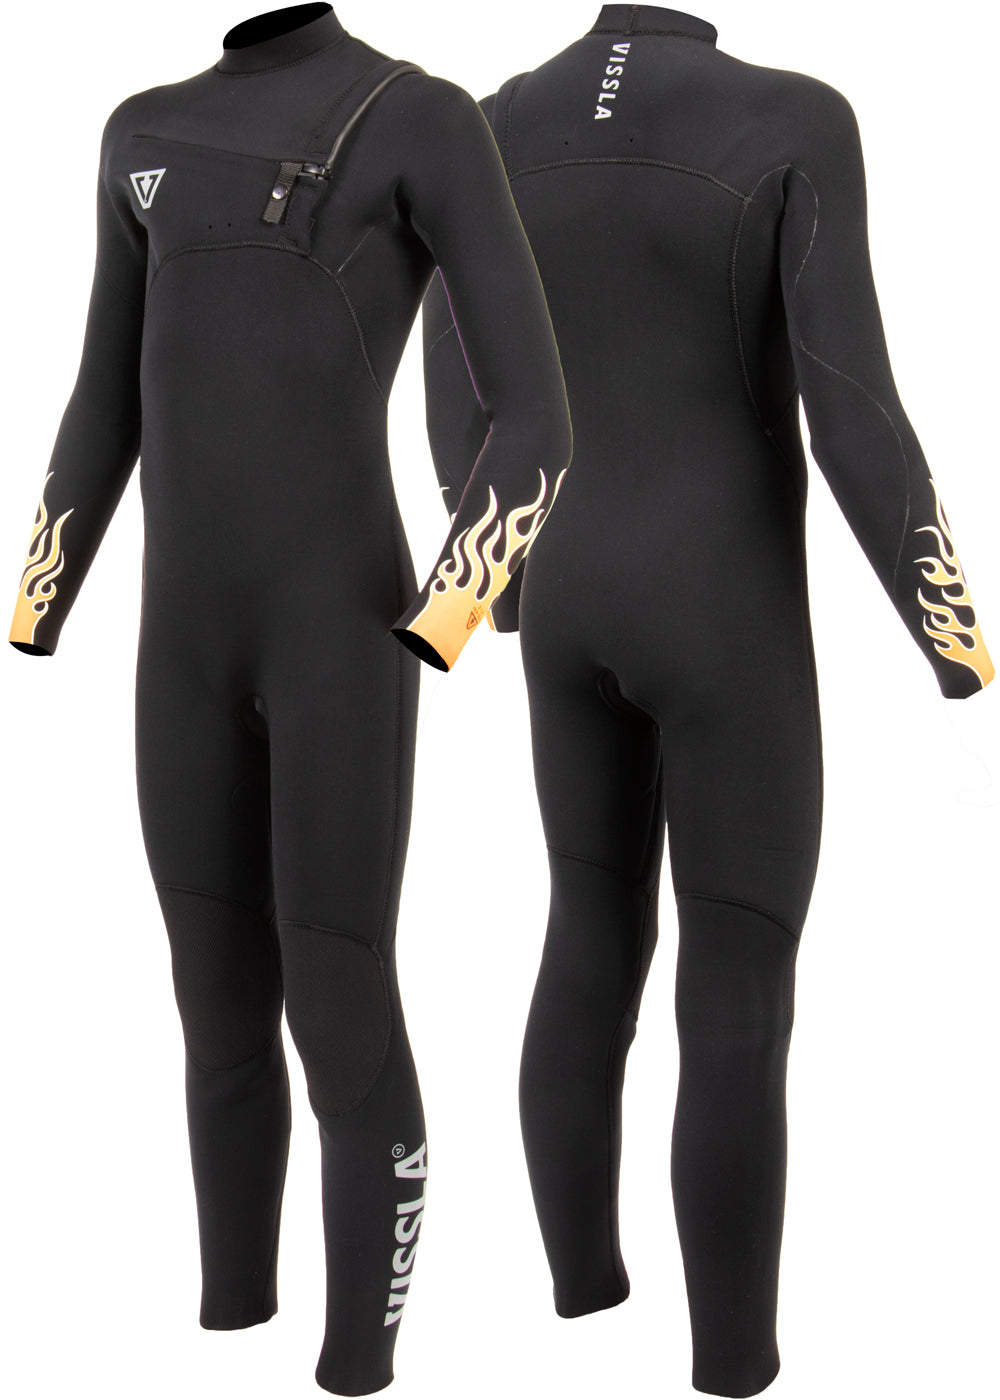 Vissla Black High Seas Boys Fire 3-2 Full Chest Zip Wetsuit. Front and Back View.